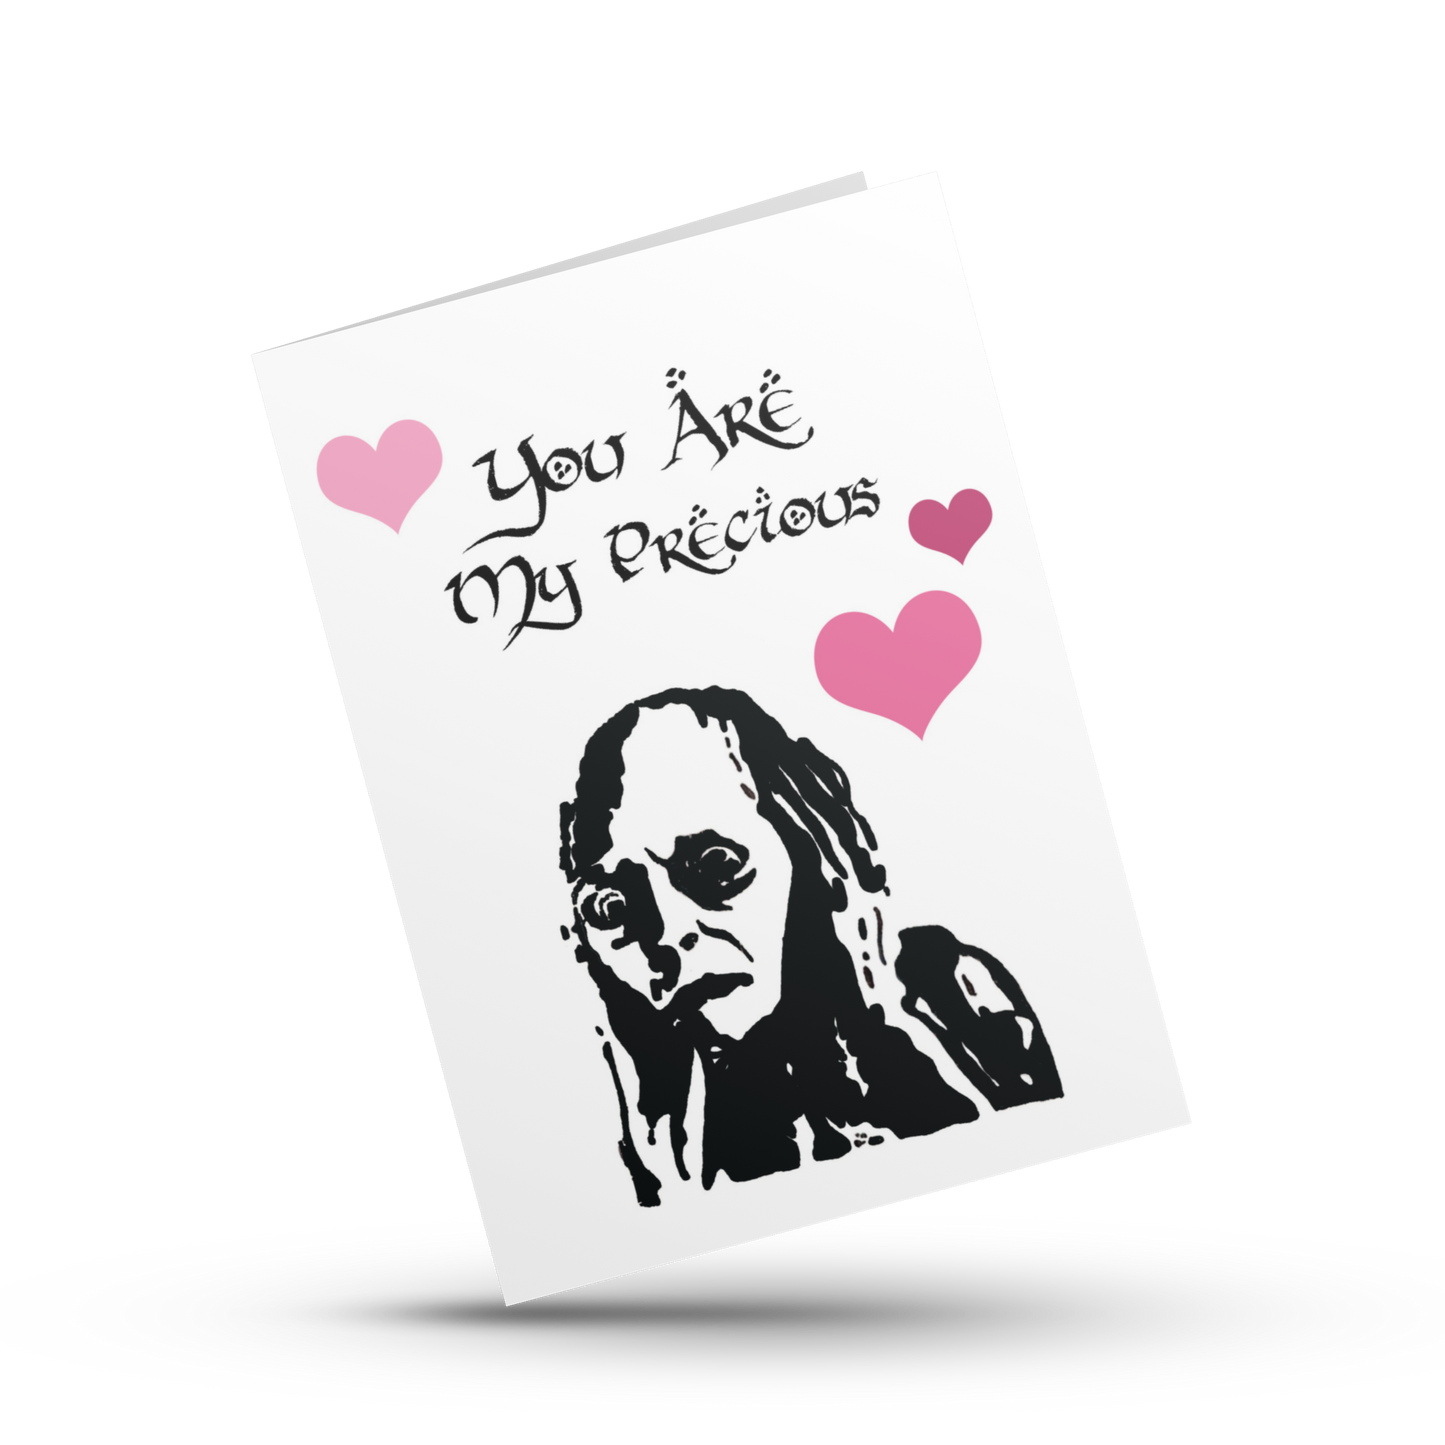 You are my precious, Lord of the Rings Valentine, LOTR Anniversary card, My precious card, Funny LOTR, Lord of the Rings card, Gollum, Nerd